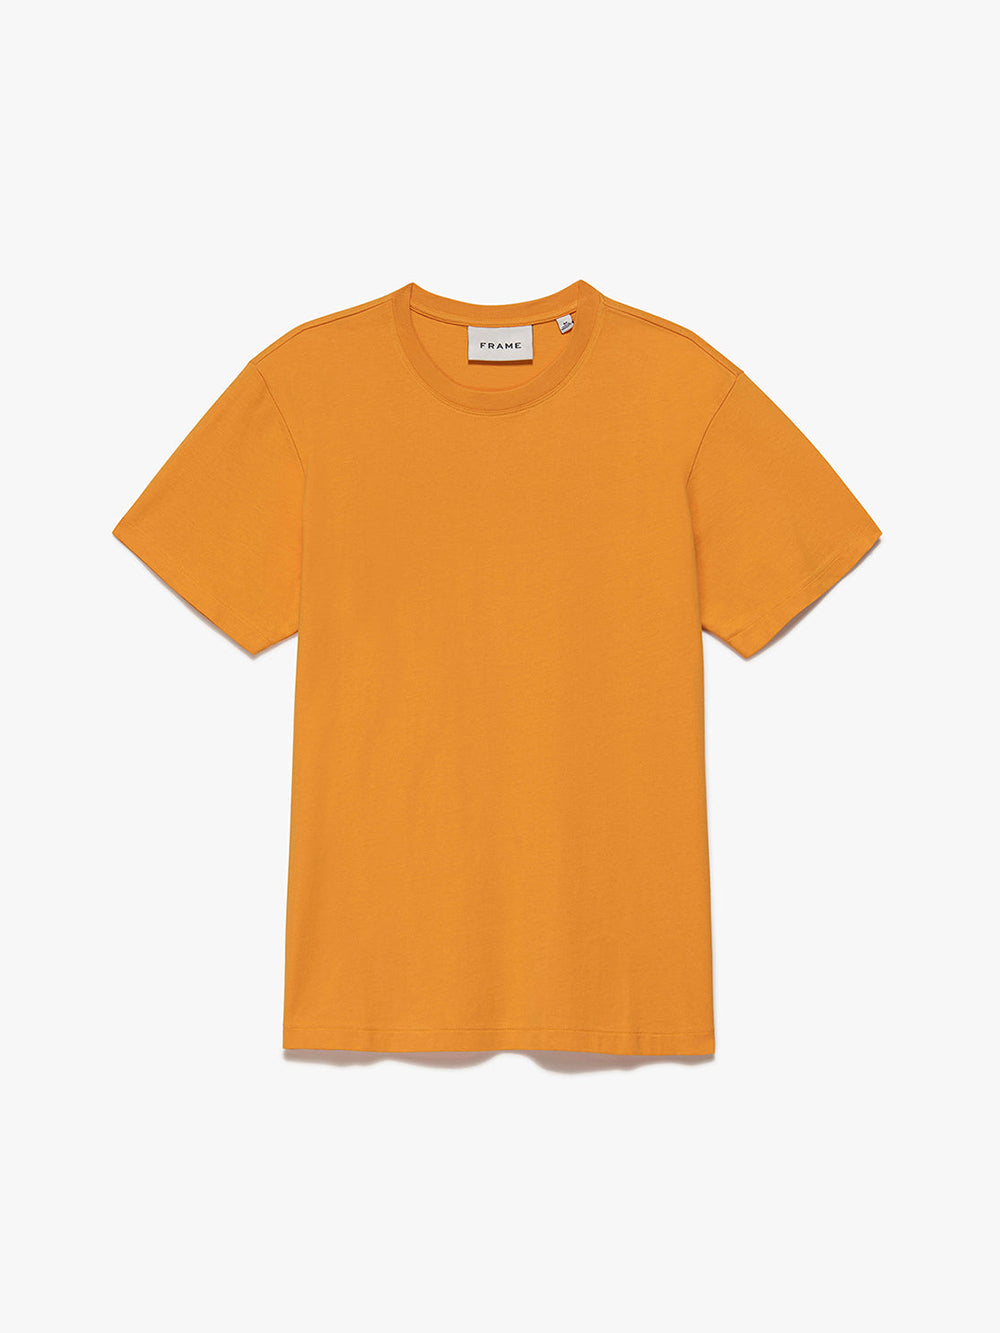 FRAME Logo Tee in Clementine